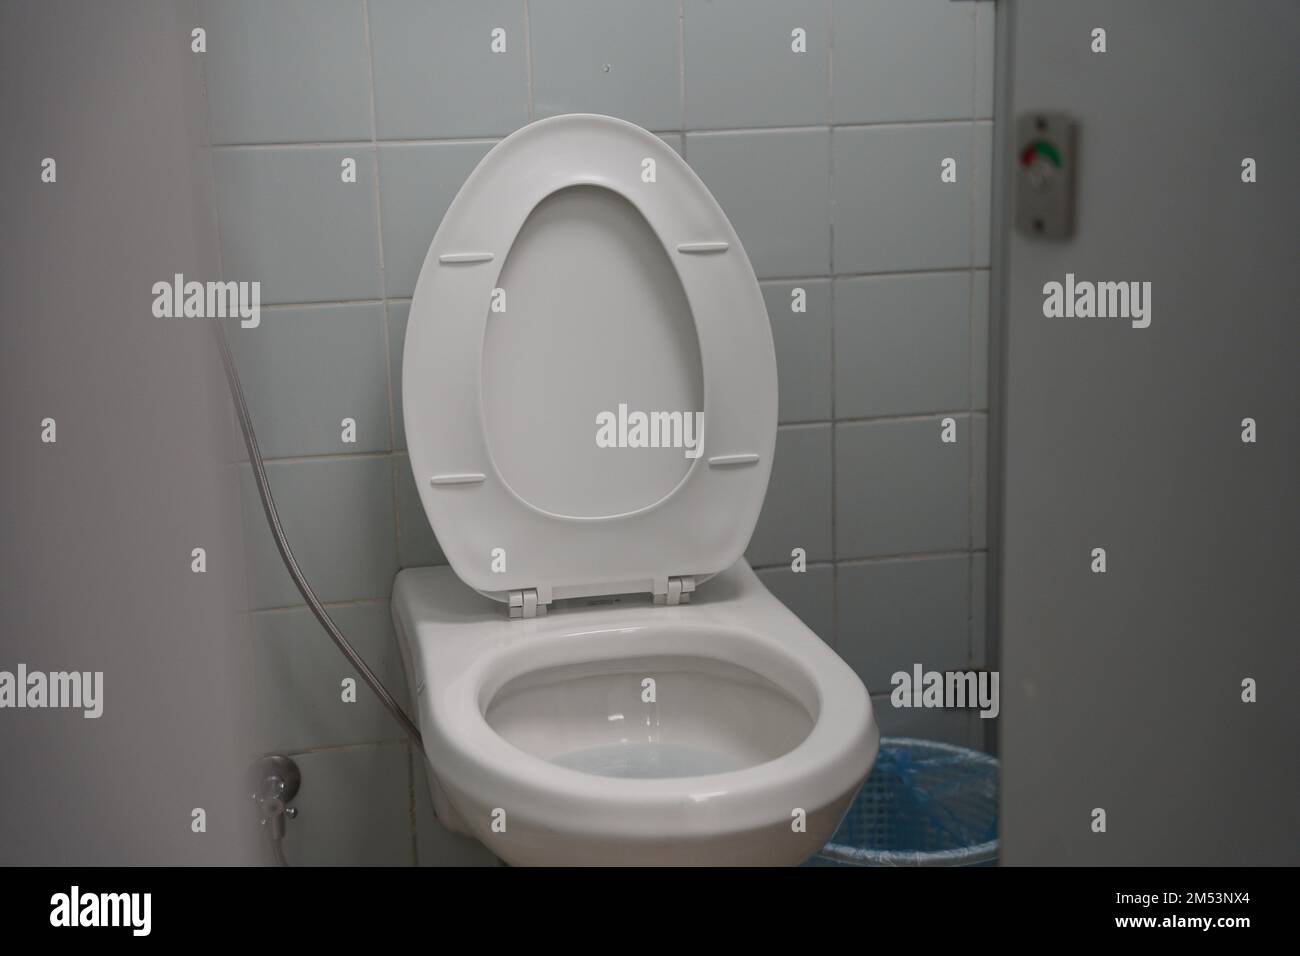 School, university or public toilet, white toilet with washing tool or 'shattaf' and trash can. Arabian toilet with the washing spray, modern toilet. Stock Photo